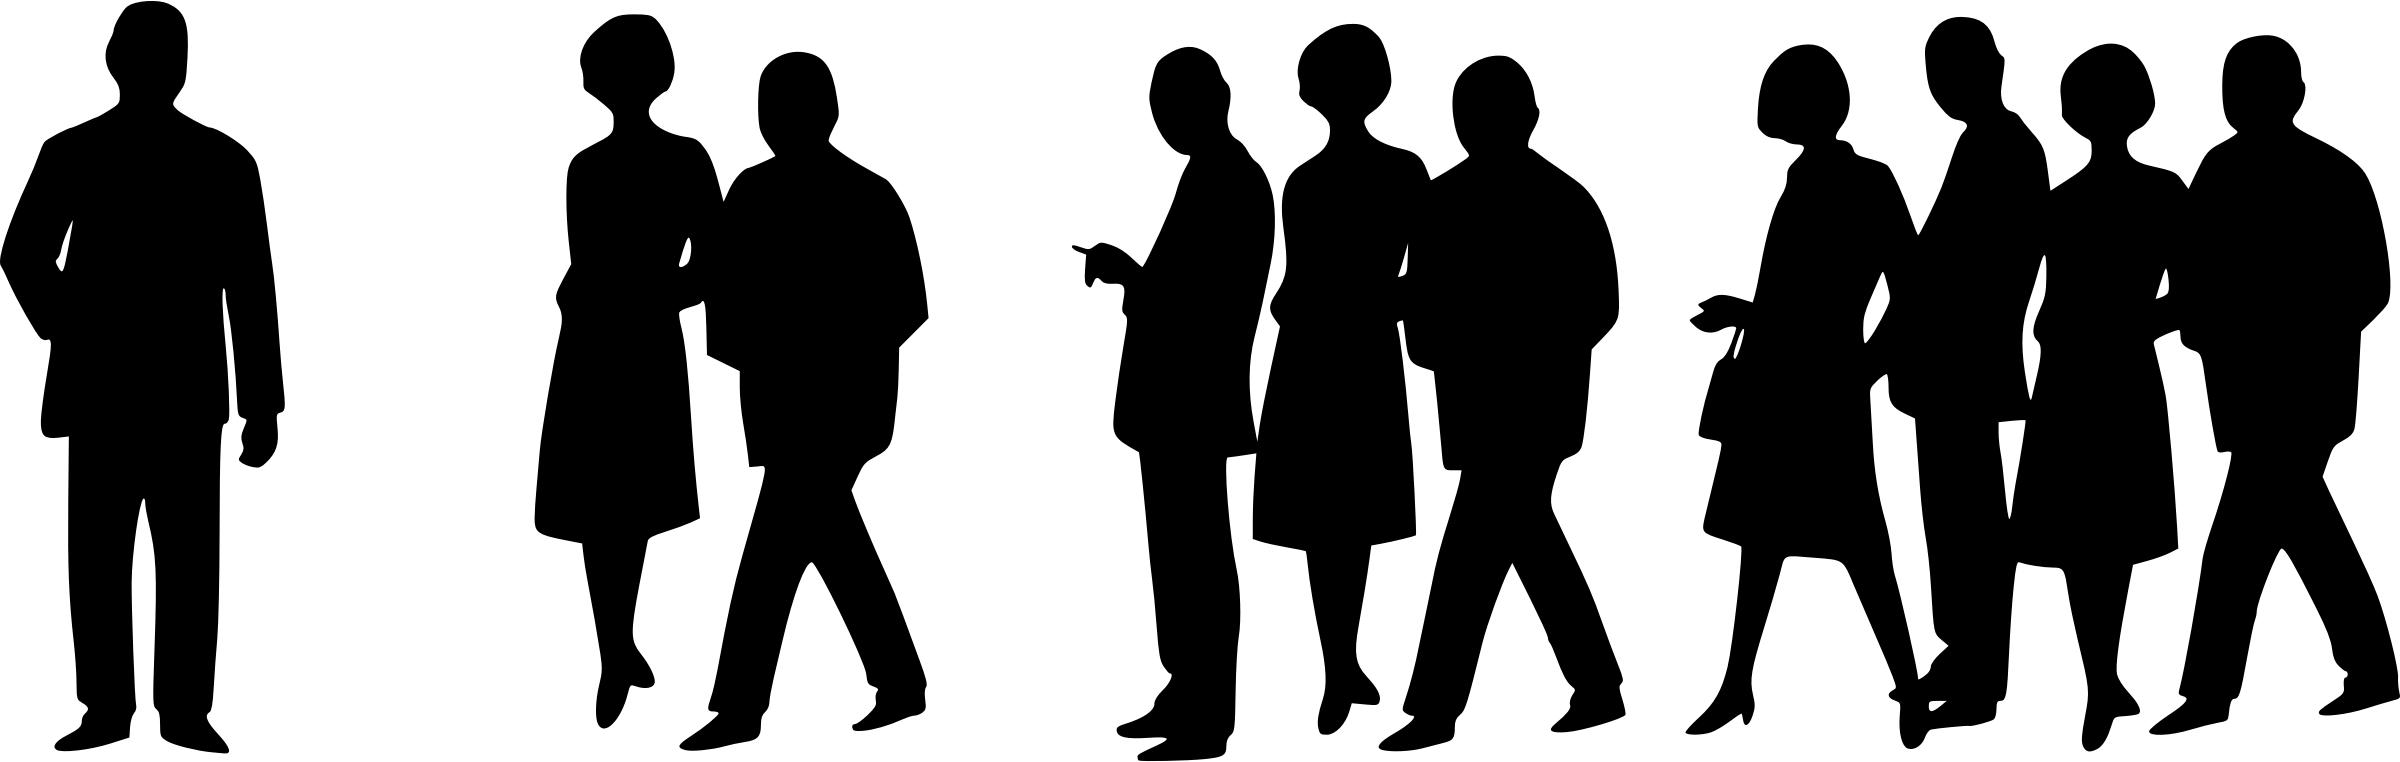 People Silhouettes - 60s Crowd png icons